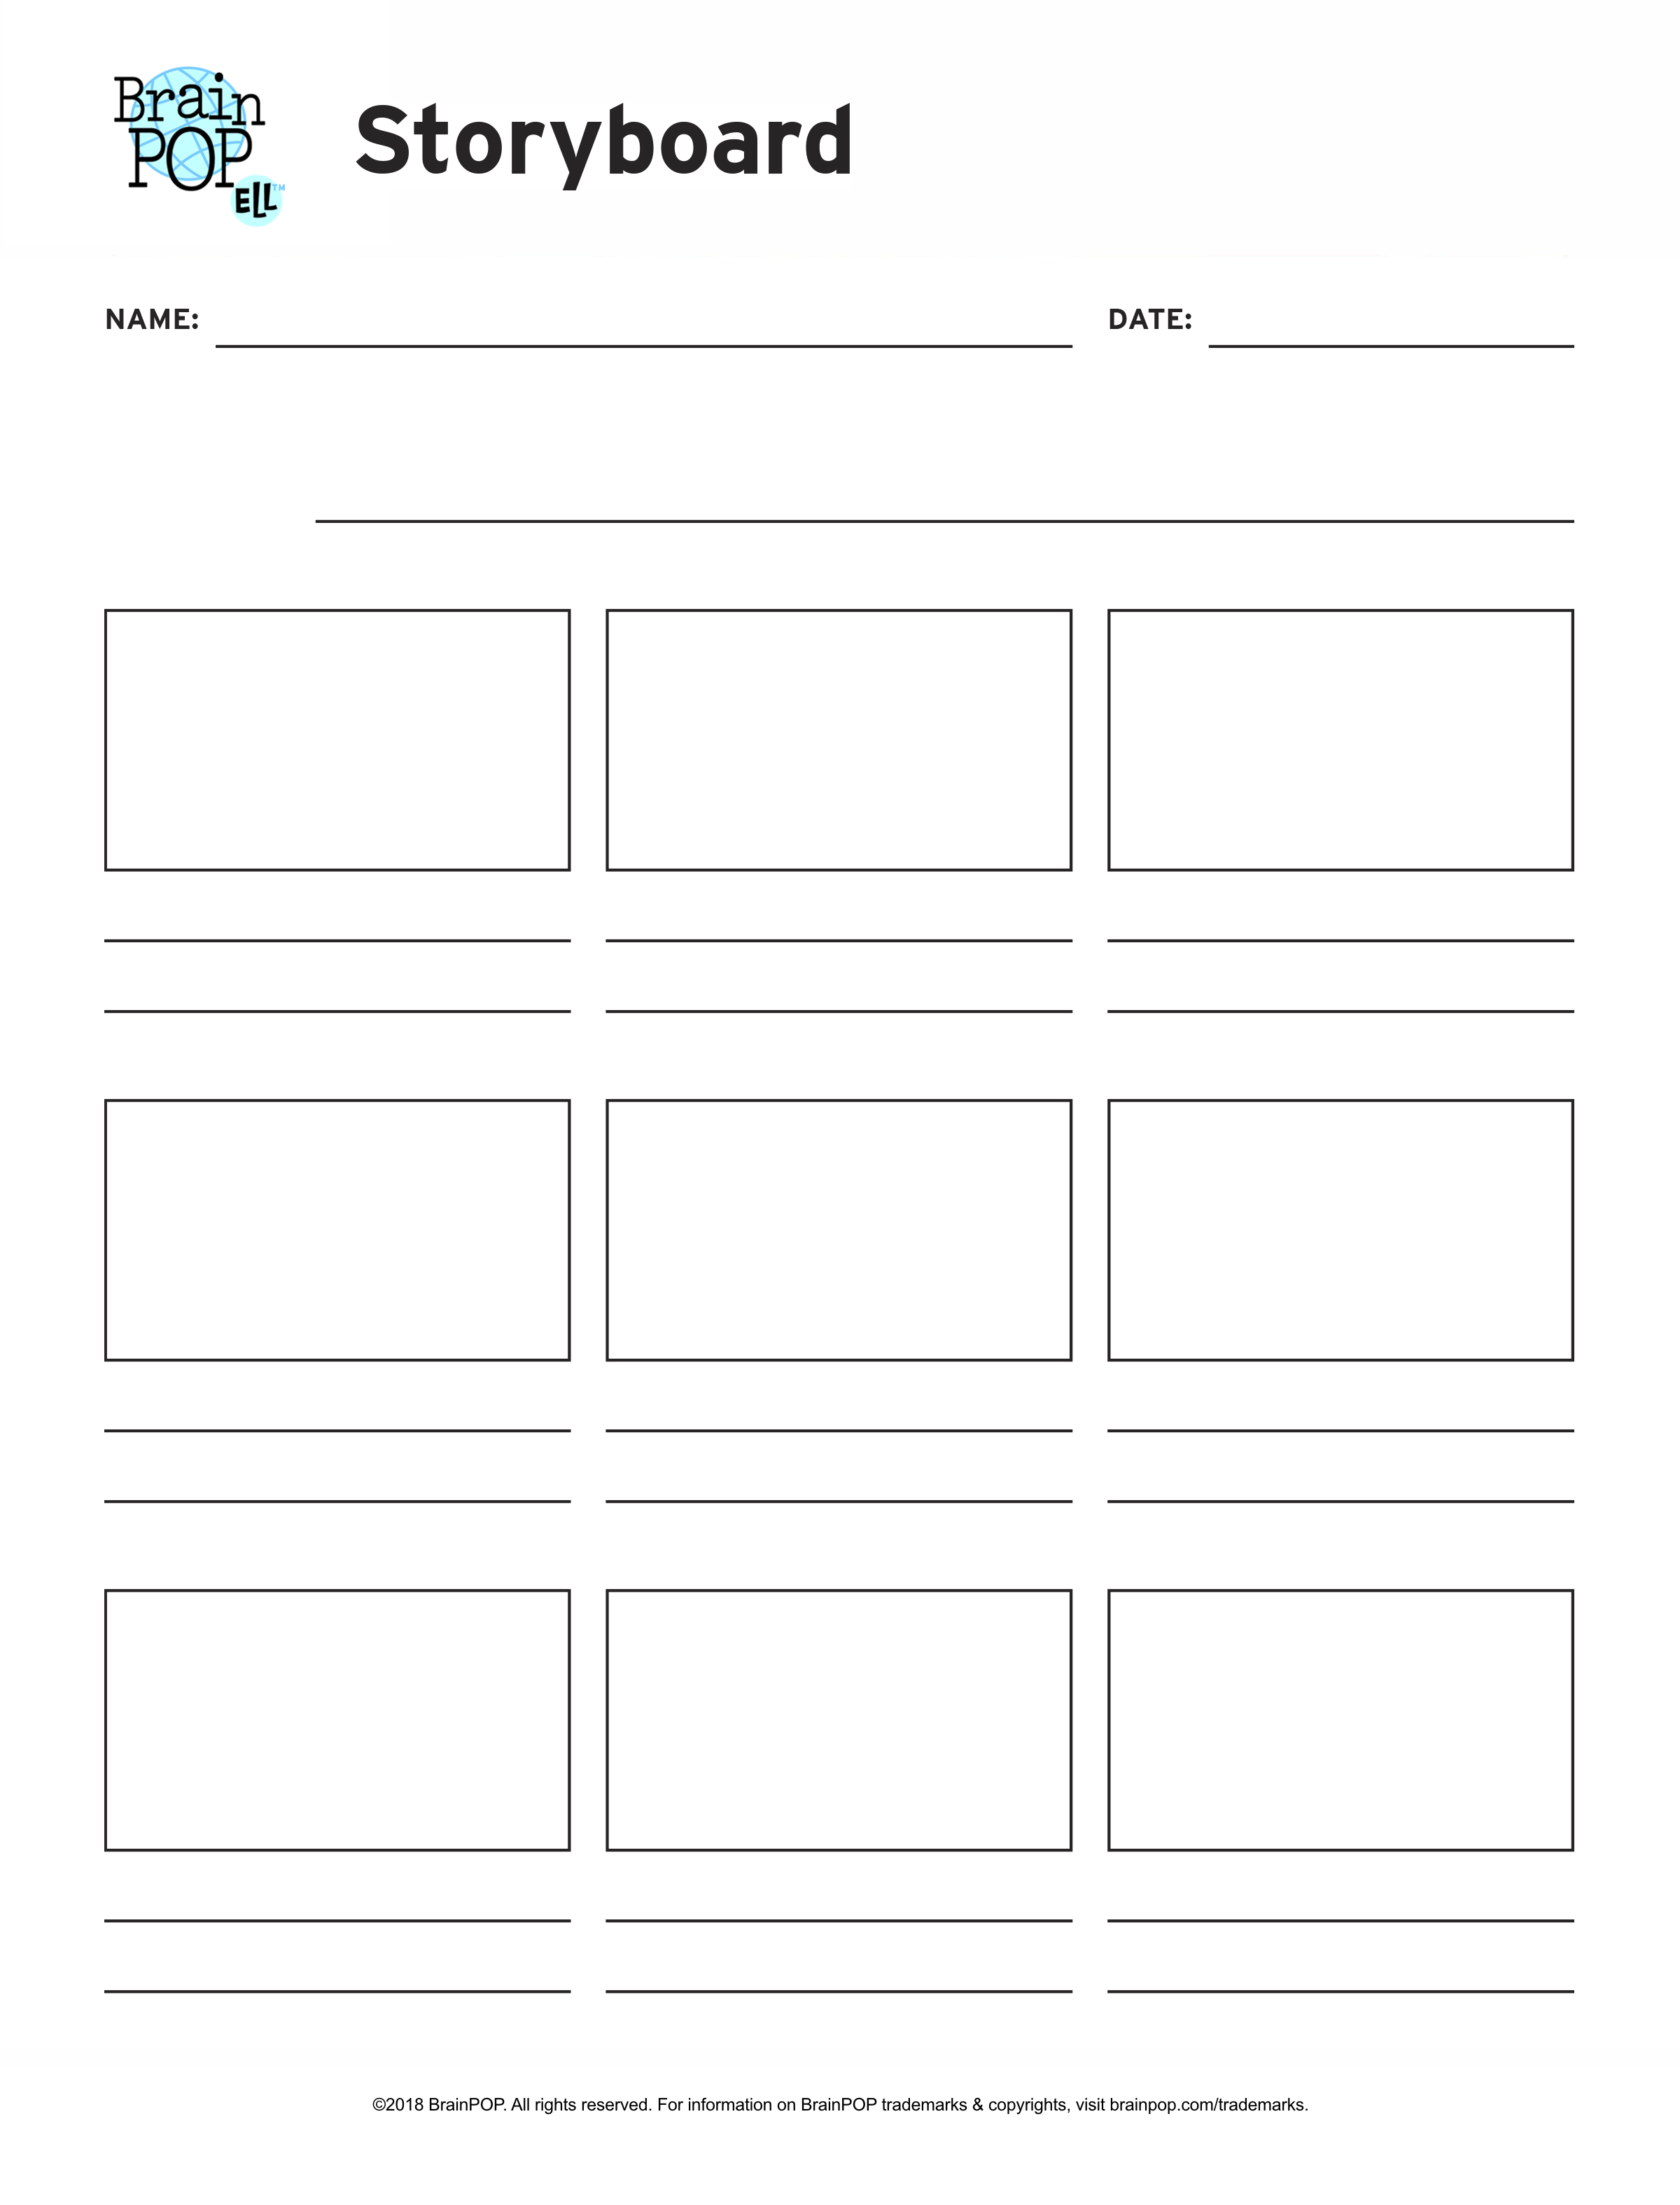 Blank Storyboard Activity Page